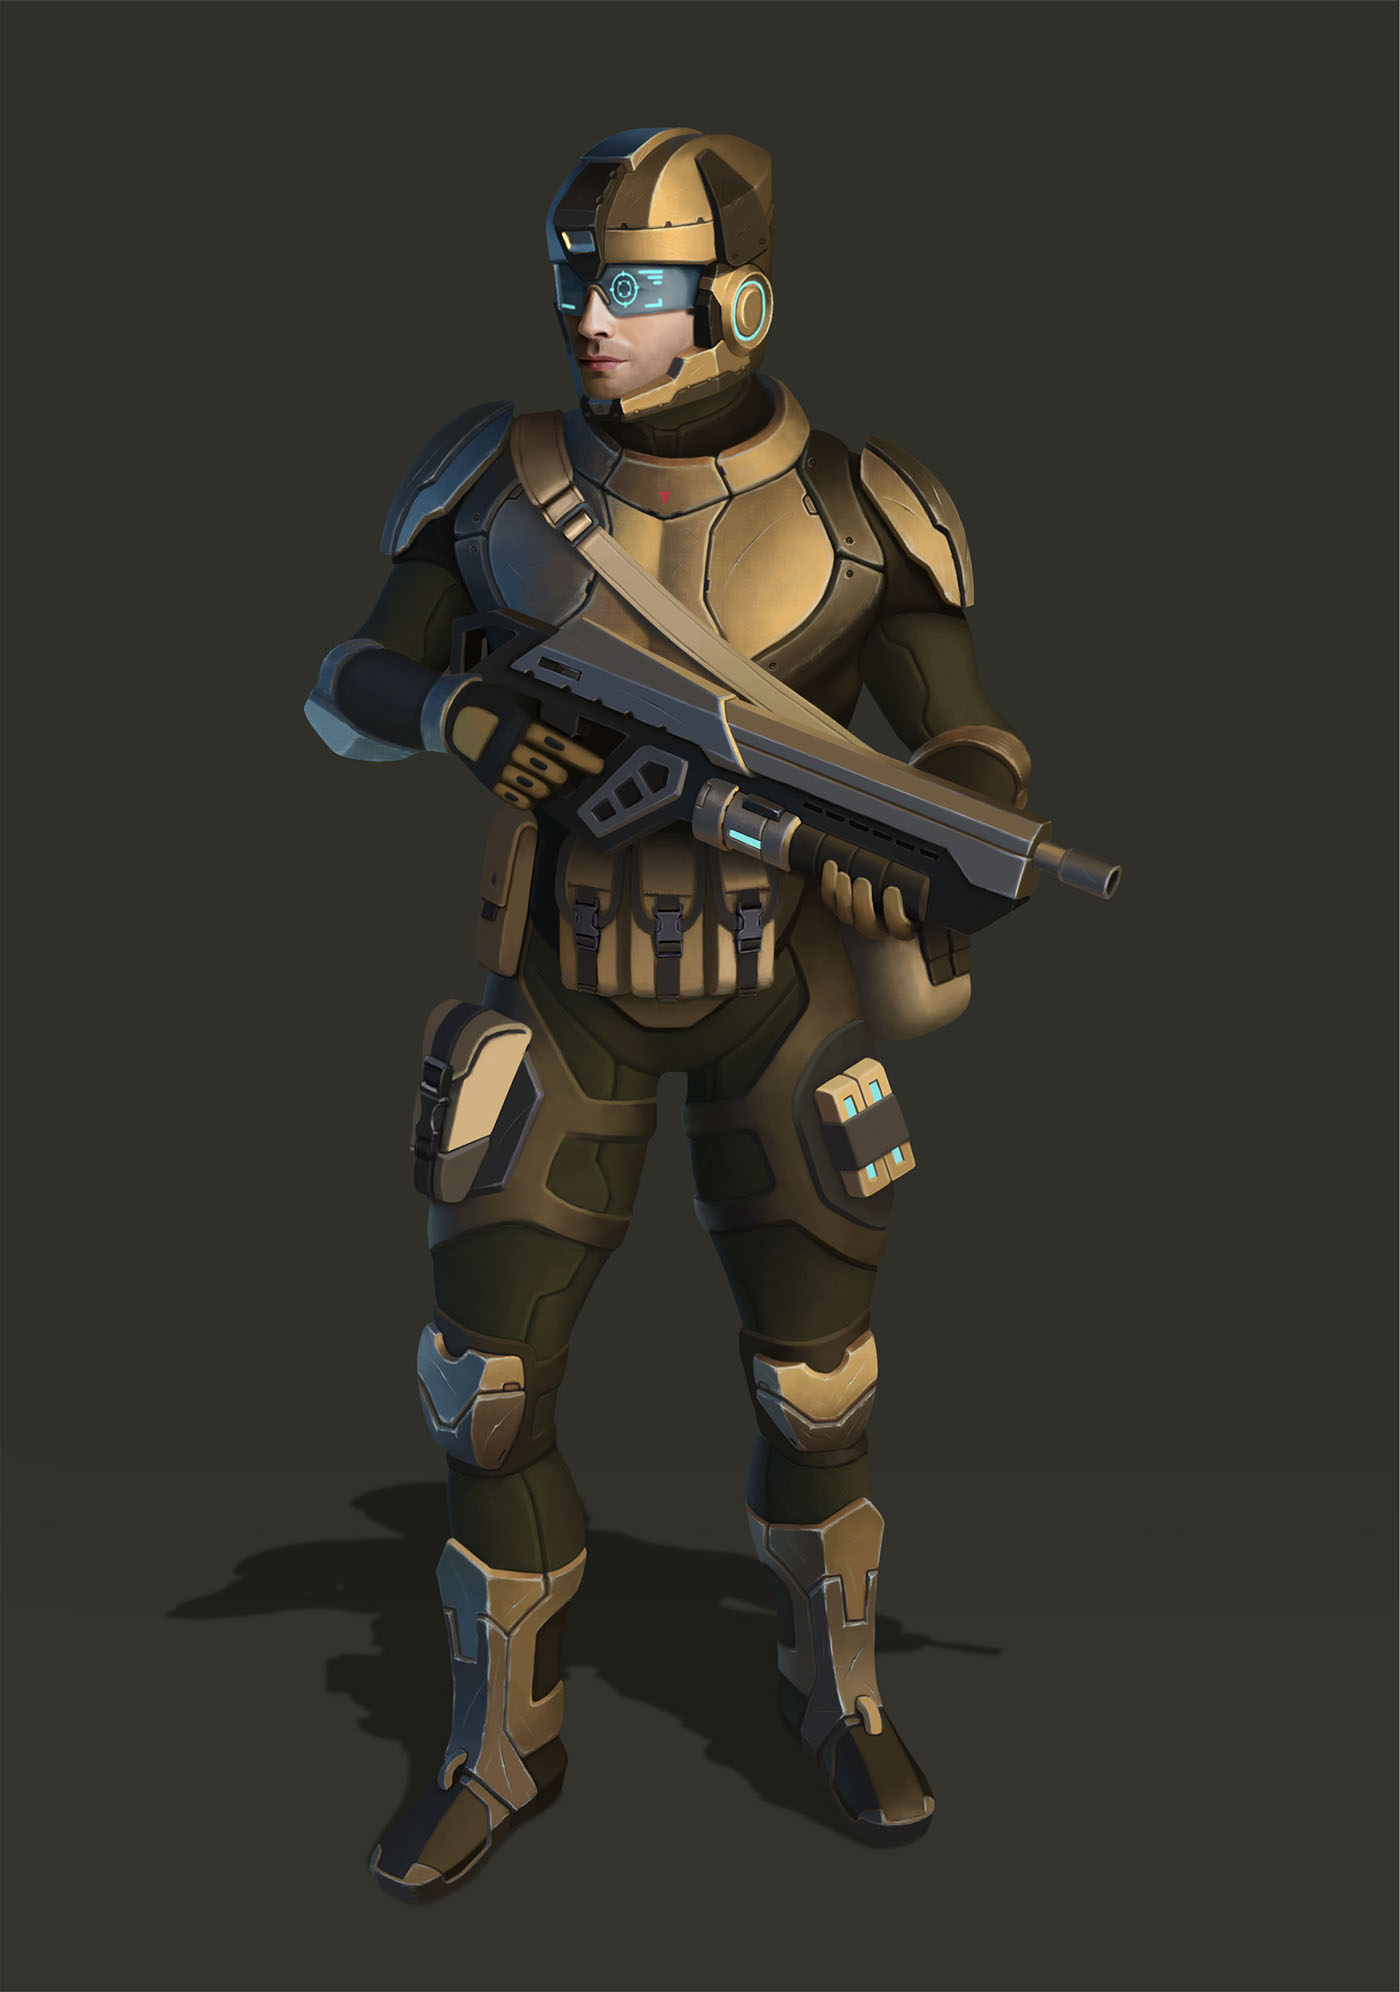 Future soldier character concept on Behance